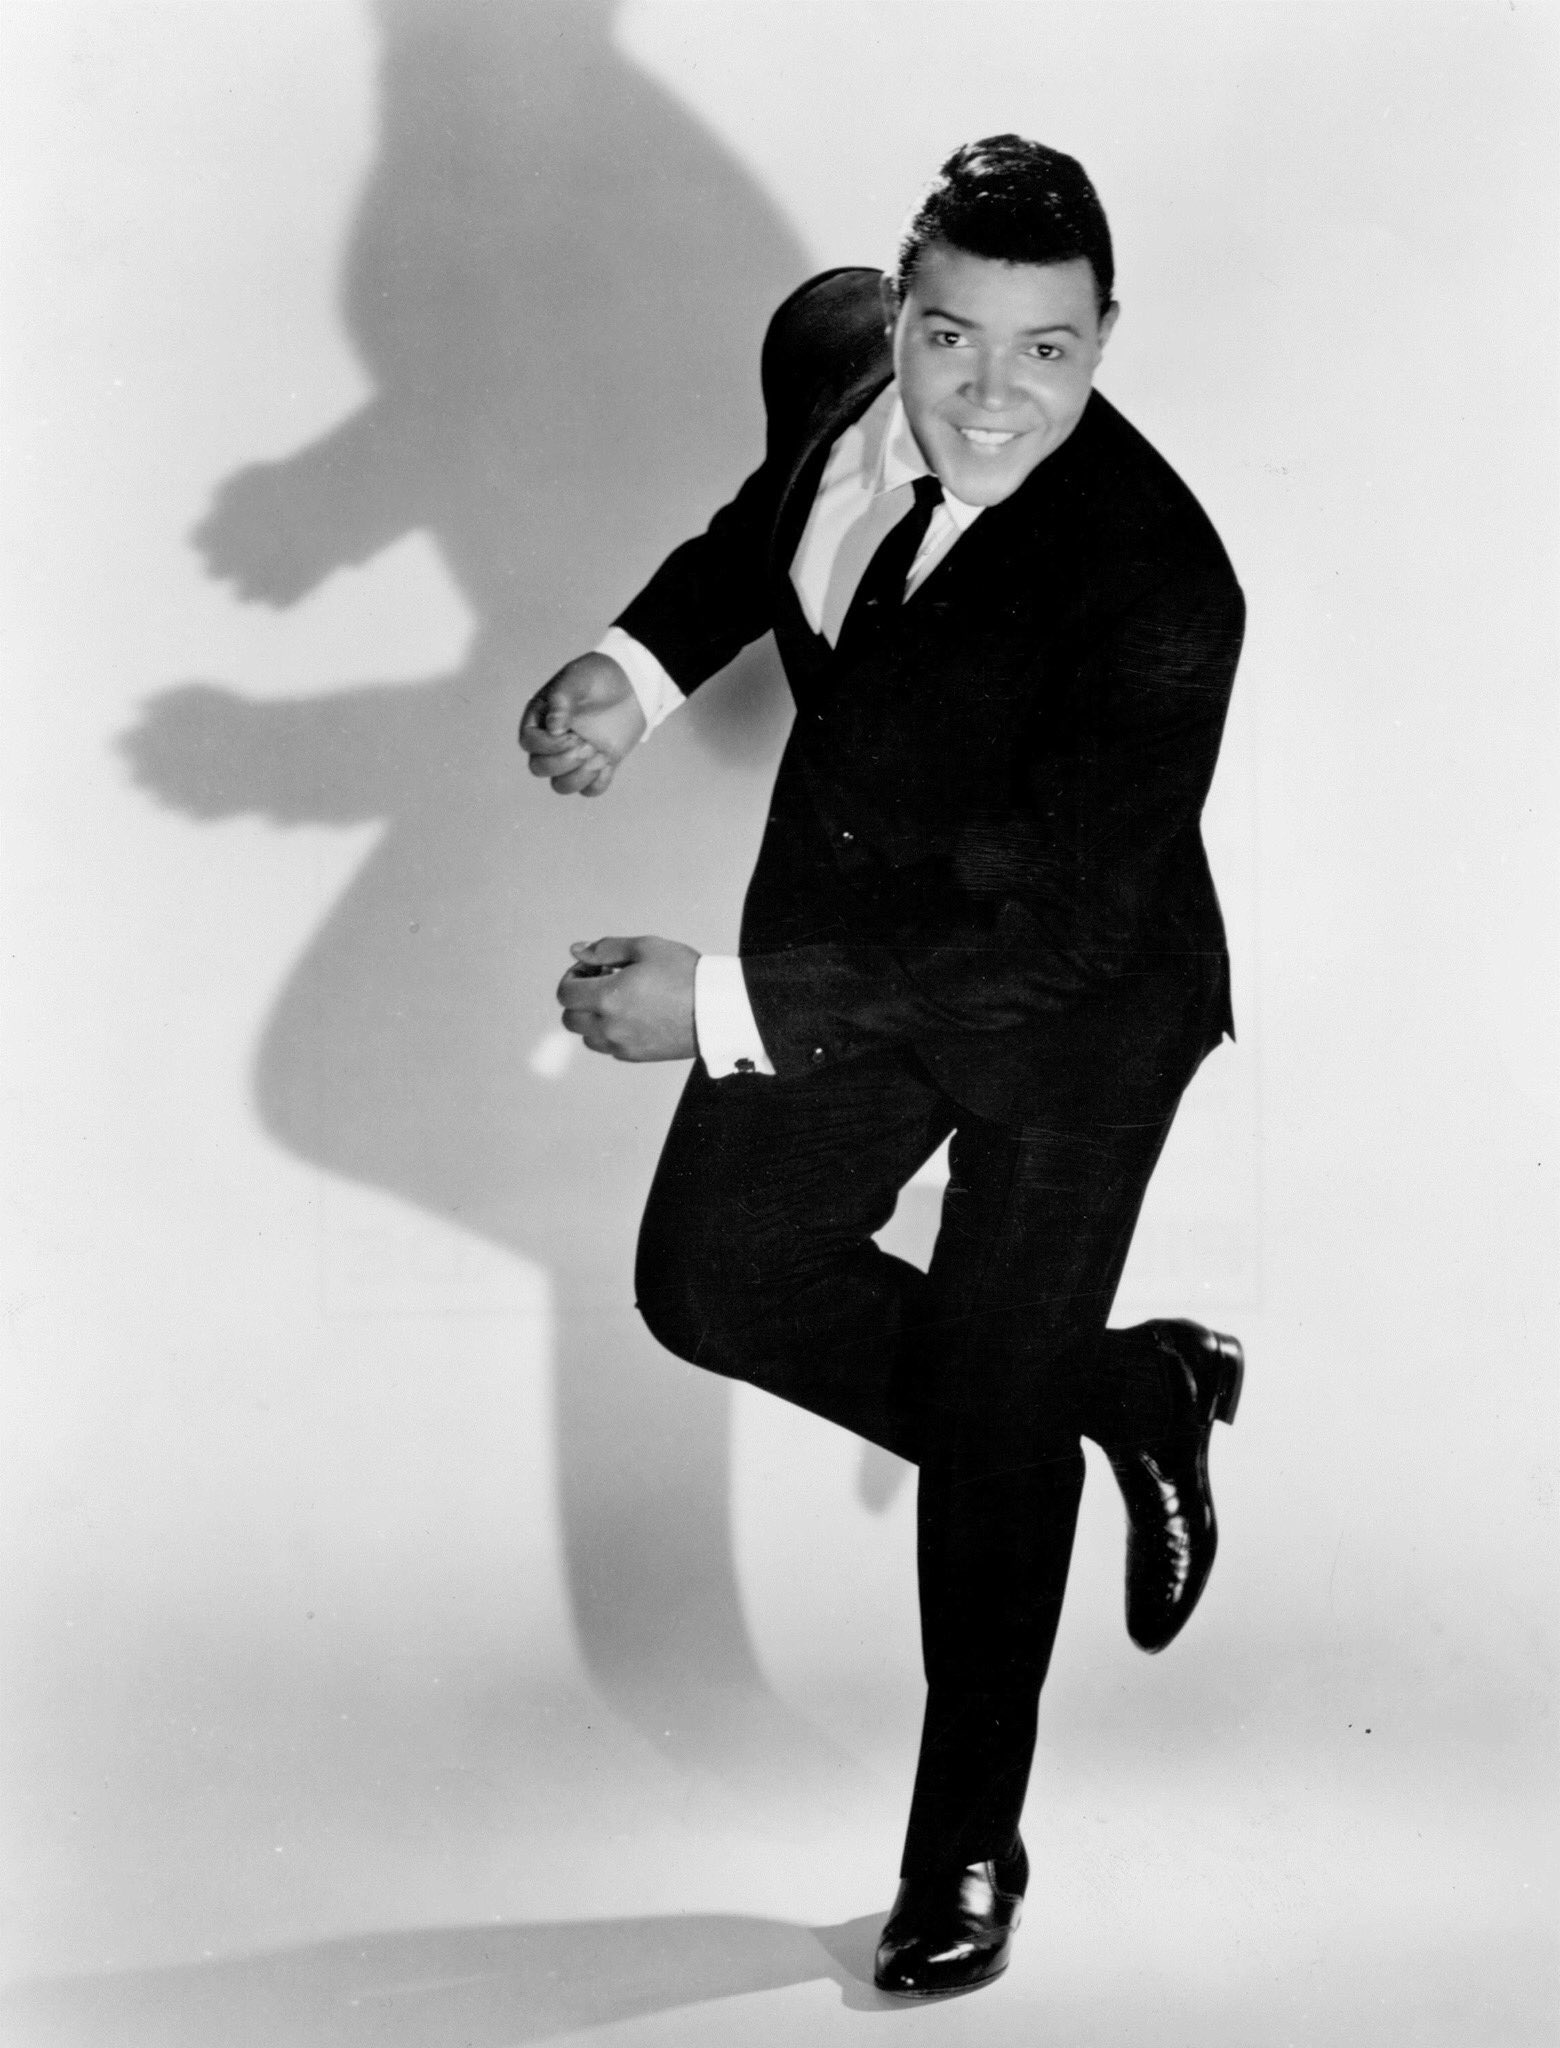 Happy birthday to American rock \n roll singer and dancer Chubby Checker, born October 3, 1941. 